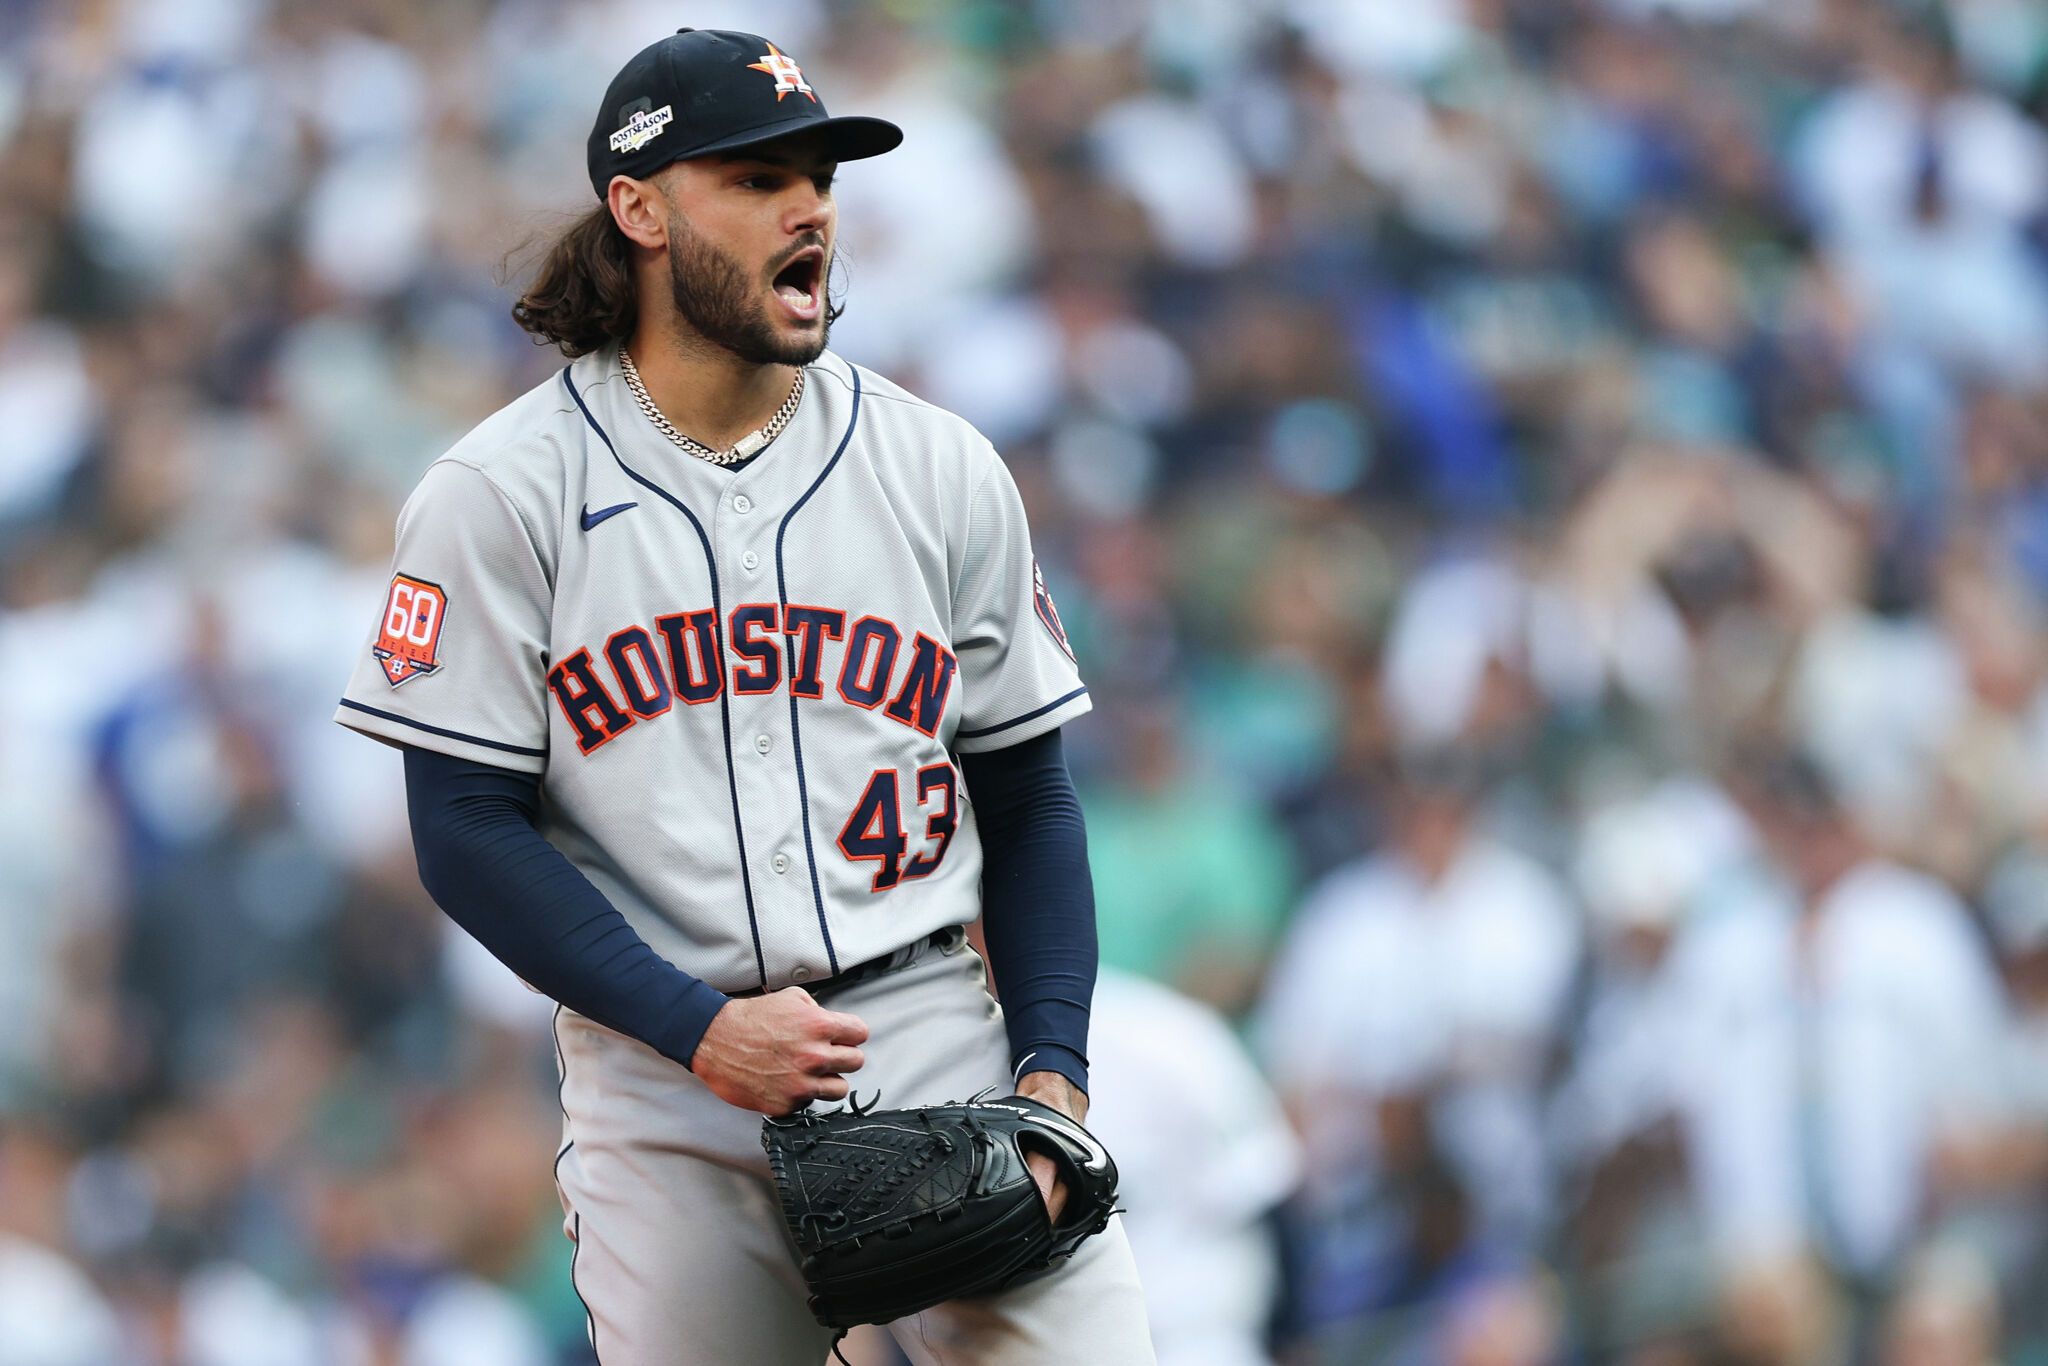 McCullers shines in season debut as Astros blank A's